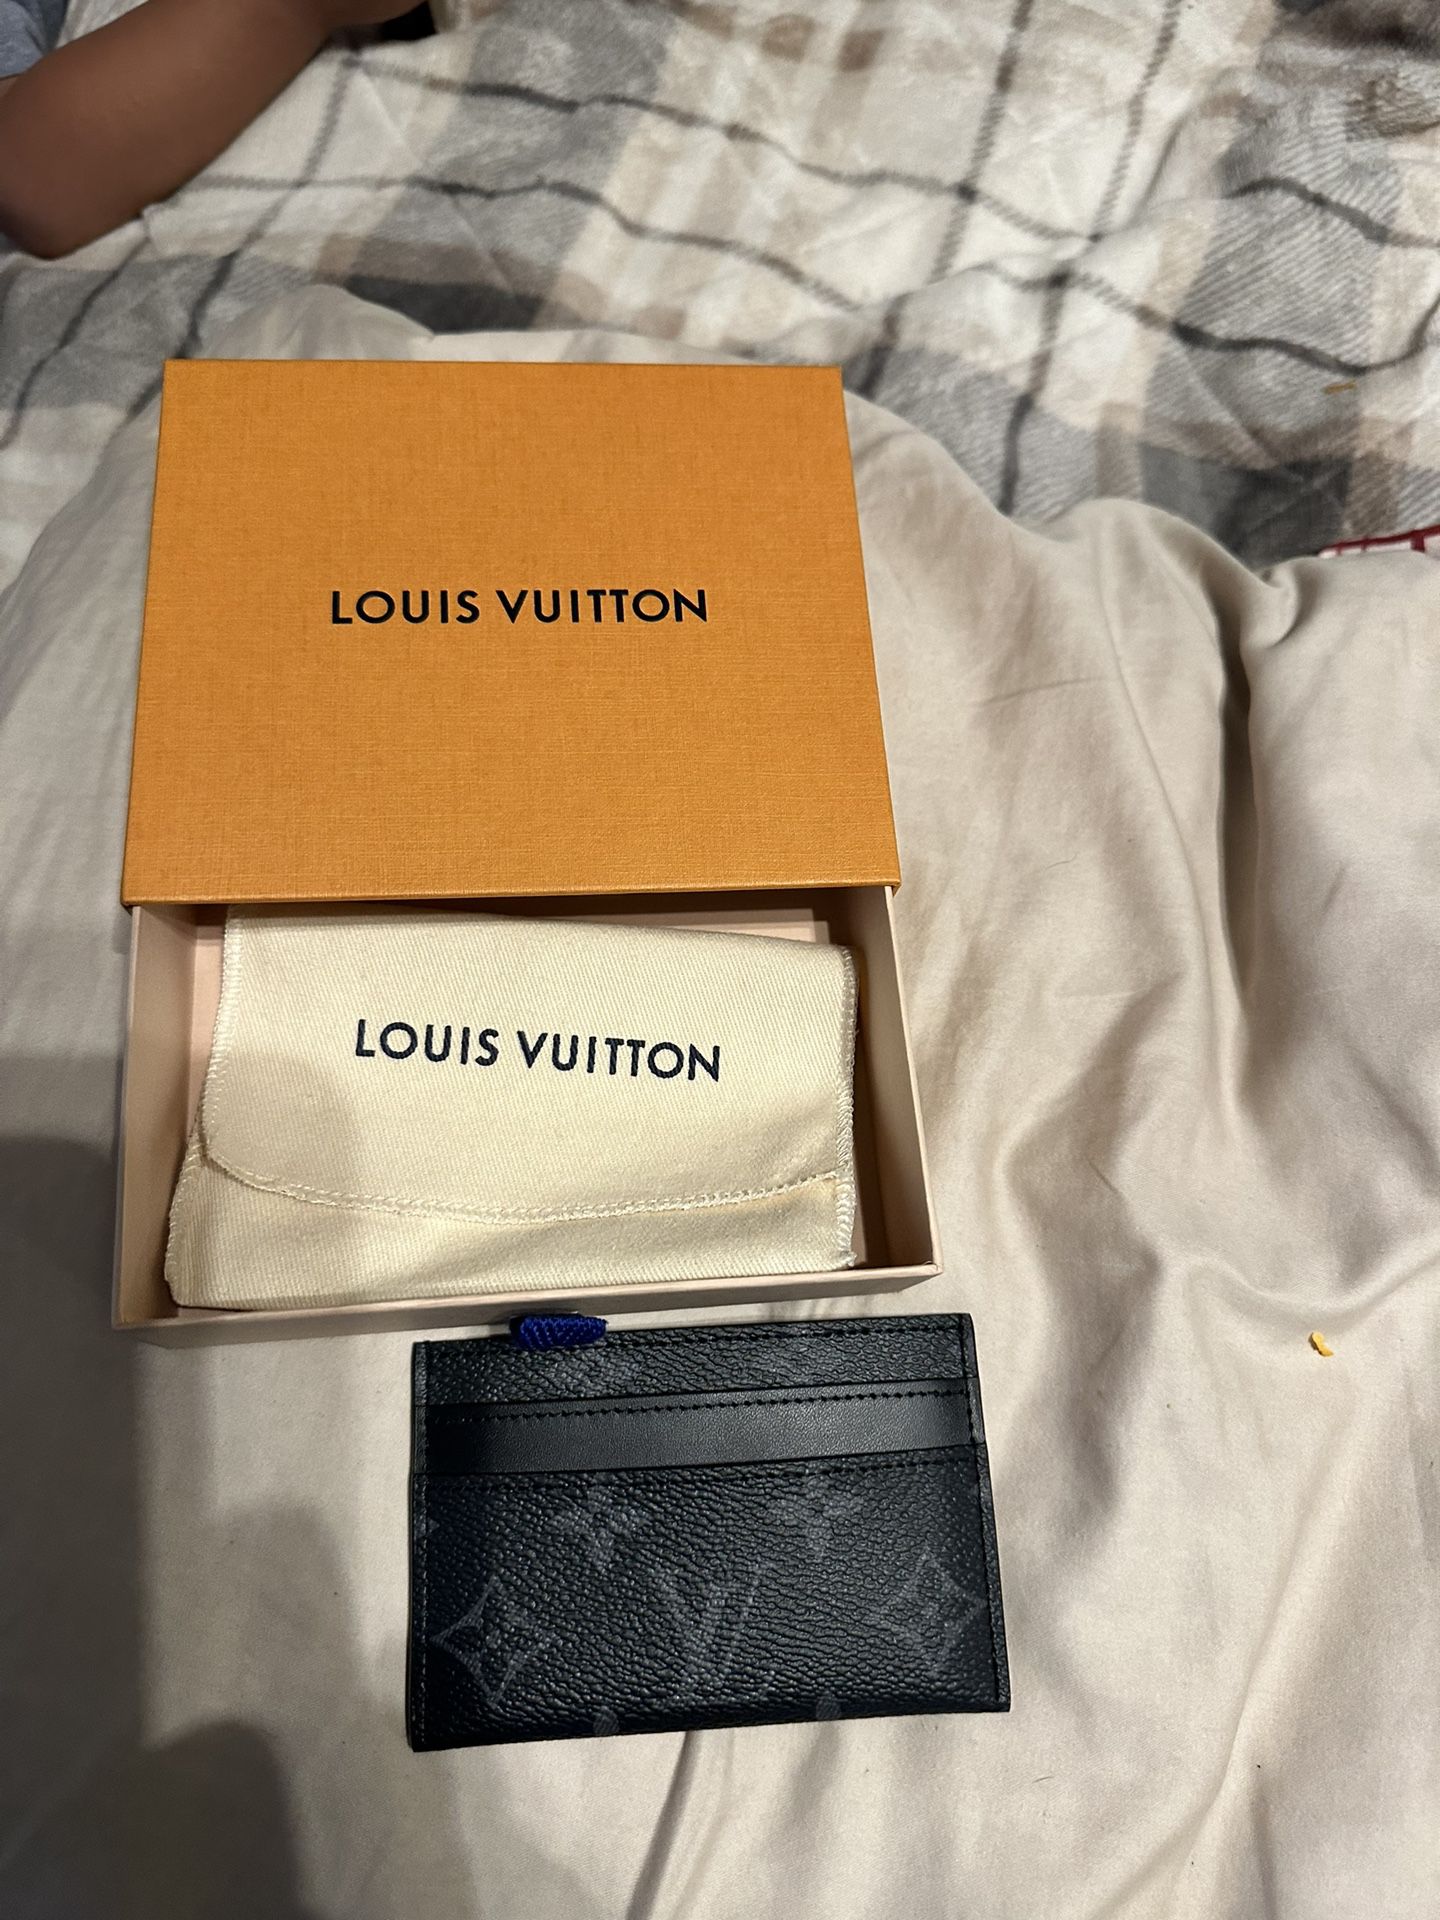 Best Louis Vuitton for sale in Arvada, Colorado for 2023